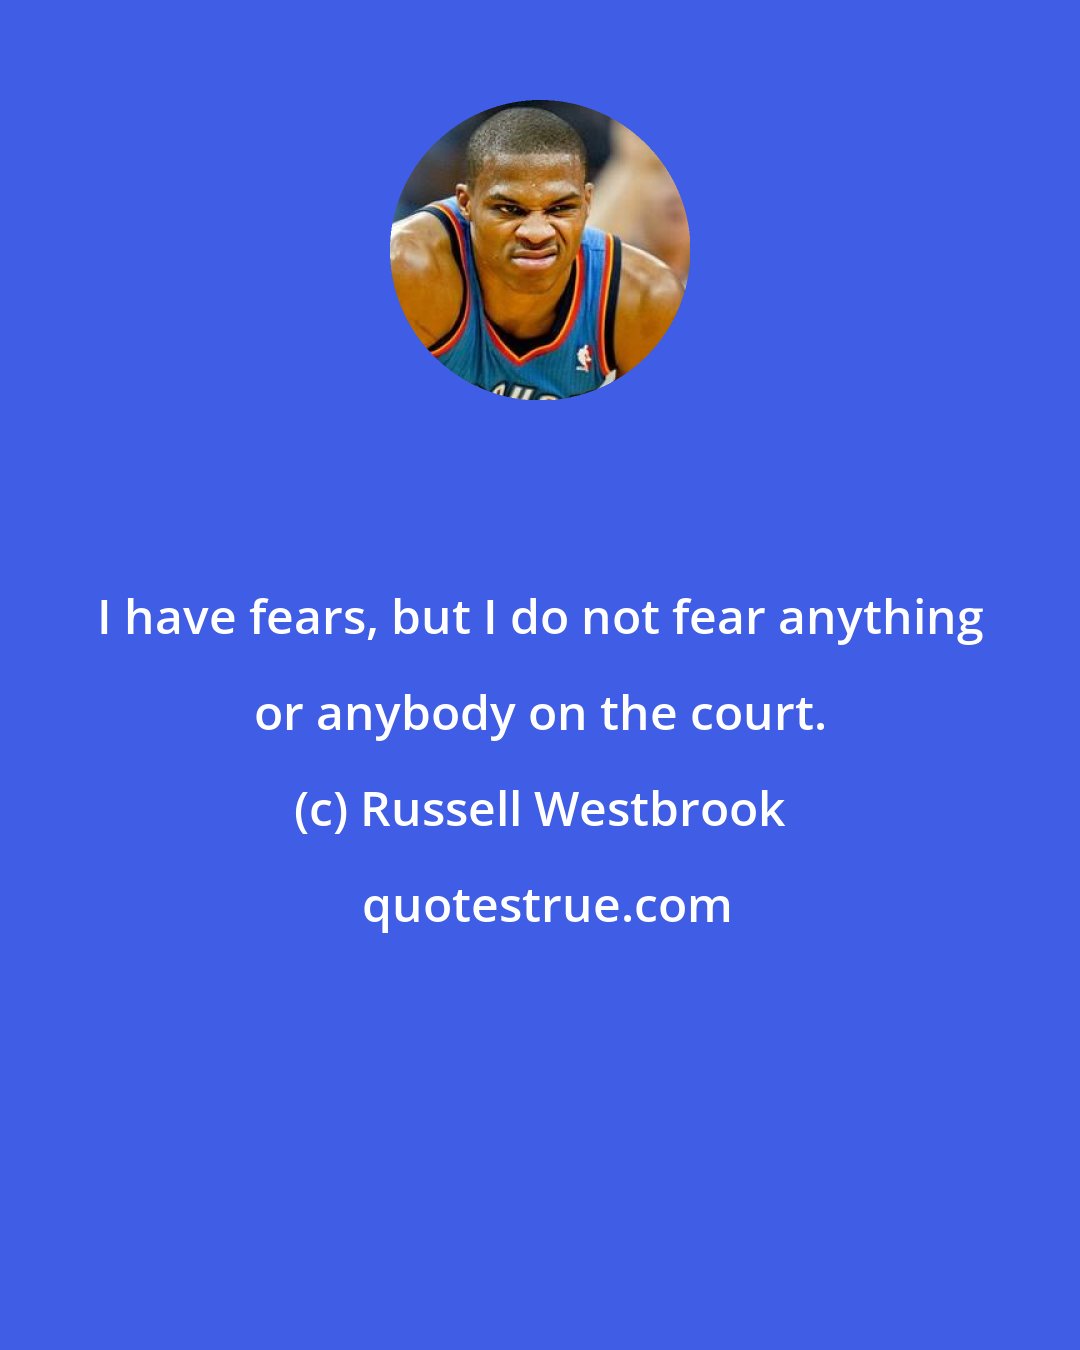 Russell Westbrook: I have fears, but I do not fear anything or anybody on the court.